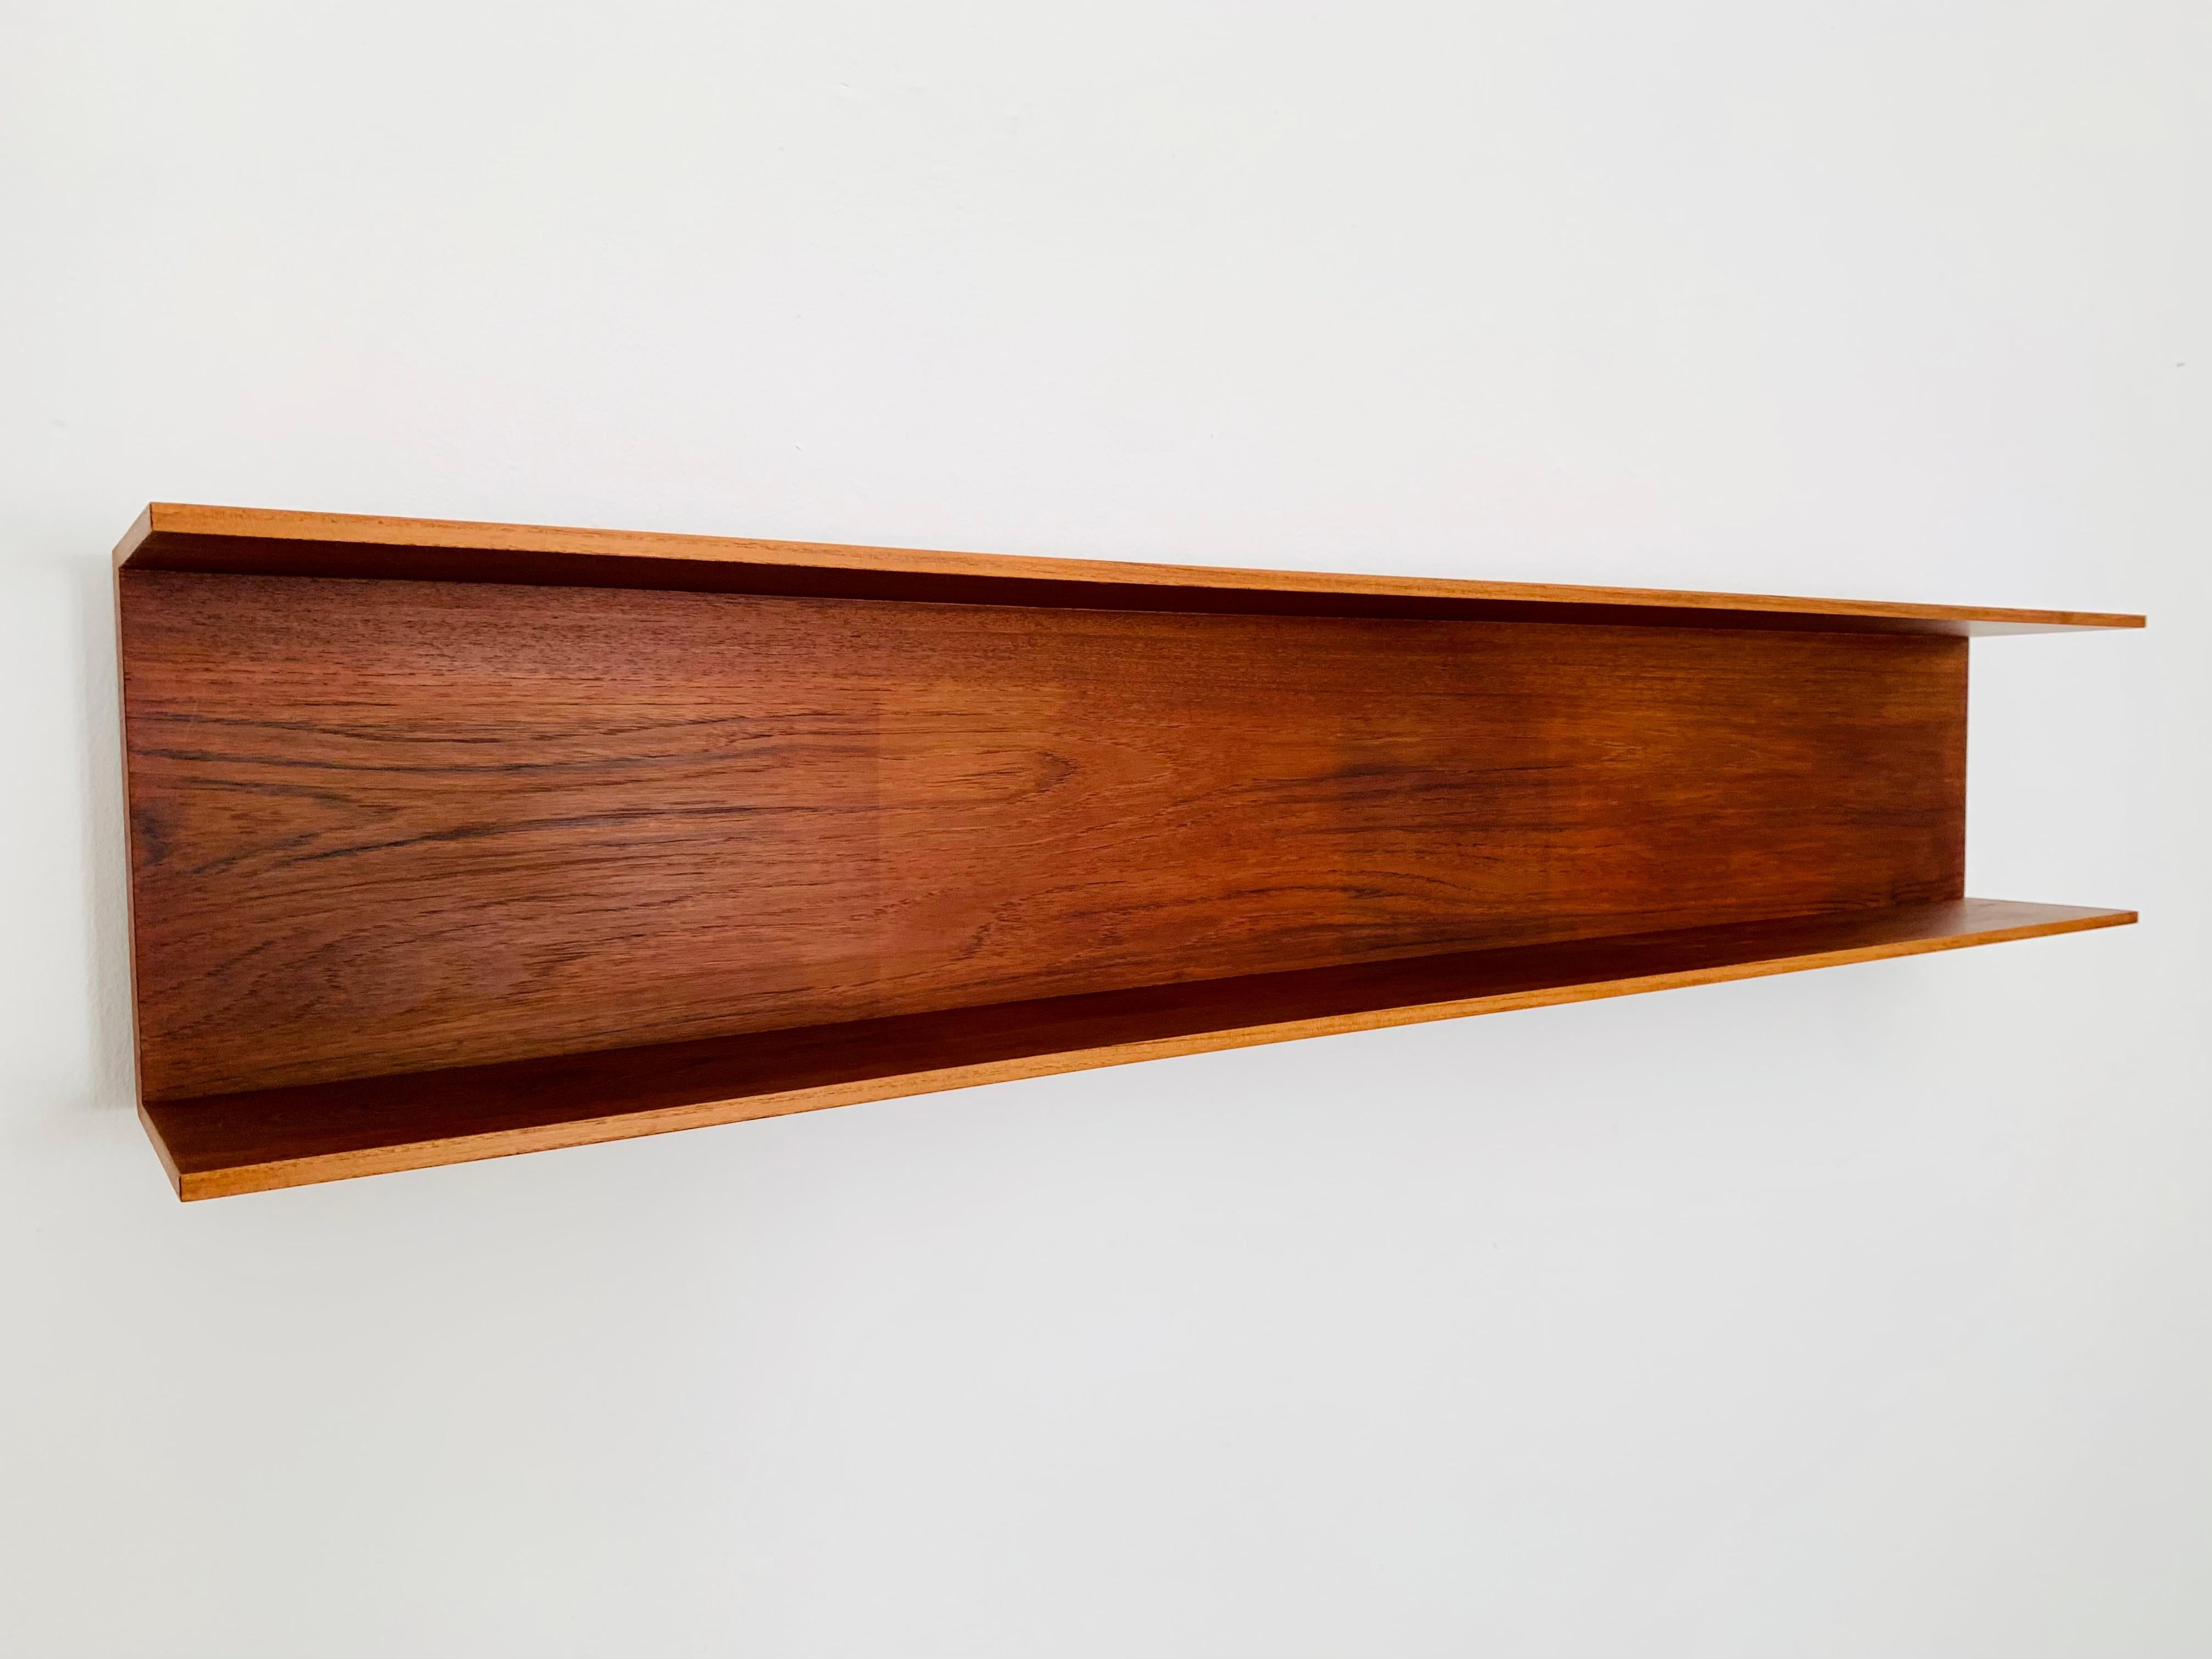 Beautiful teak shelf from the 1950s.
Wonderful high-quality workmanship and an absolute favourite.
Flexible in use and sturdily constructed.

Design: Walter Wirz
Manufacturer: Wilhelm Renz

Condition:

Very good vintage condition with slight signs